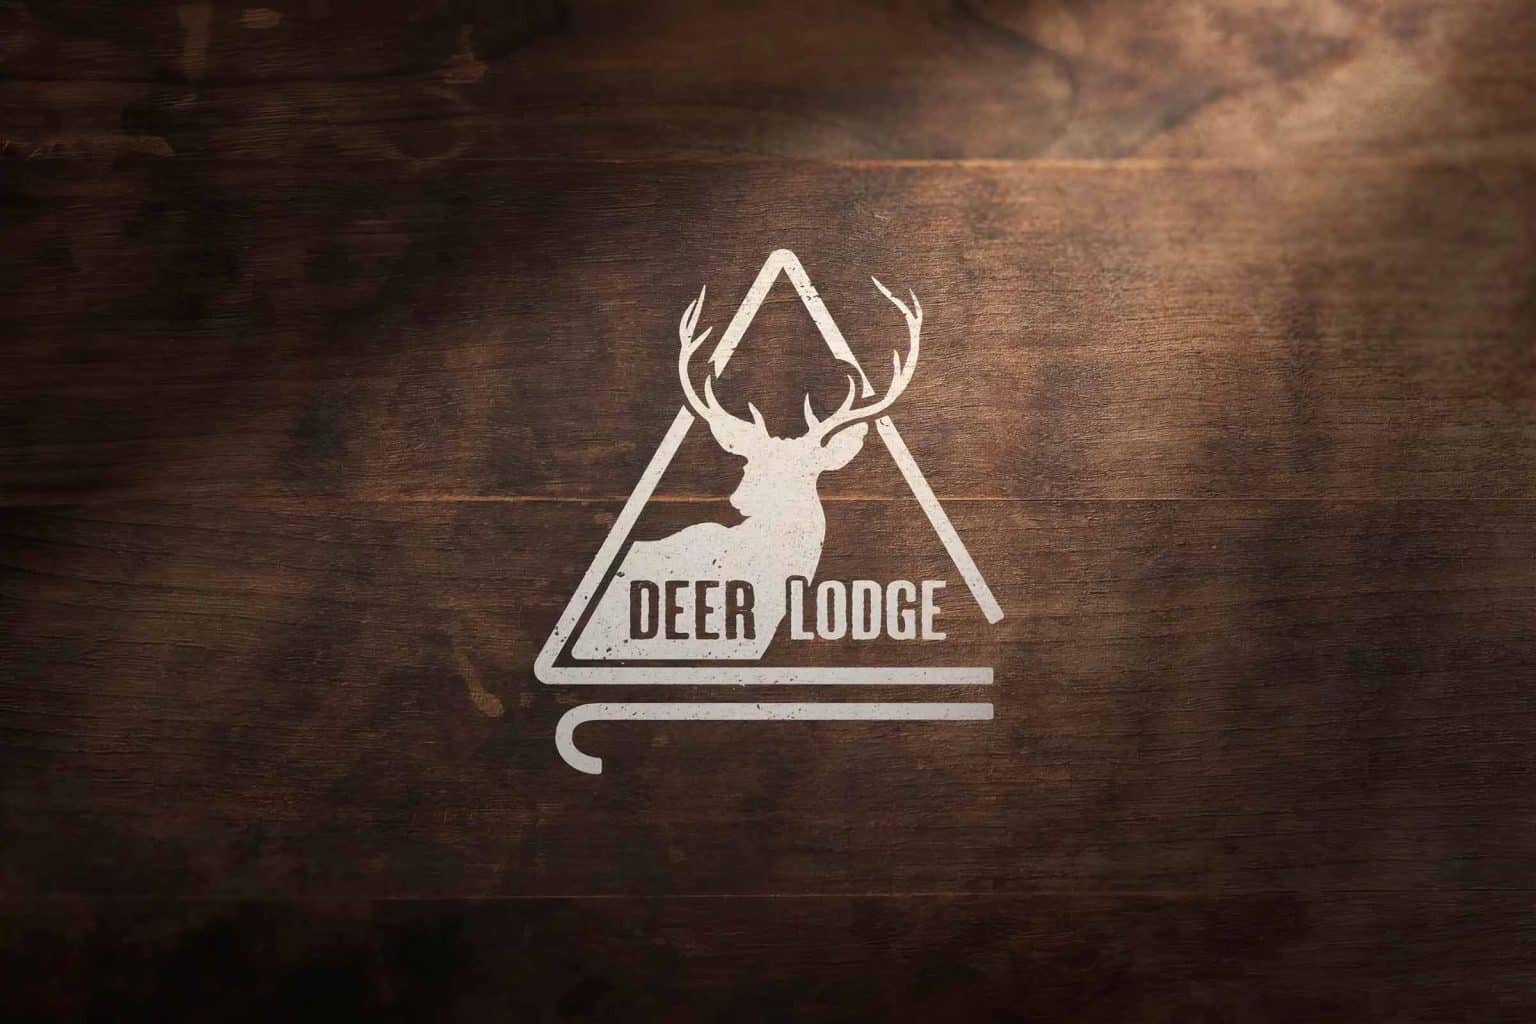 A logo featuring the silhouette of a deer inside a triangle.